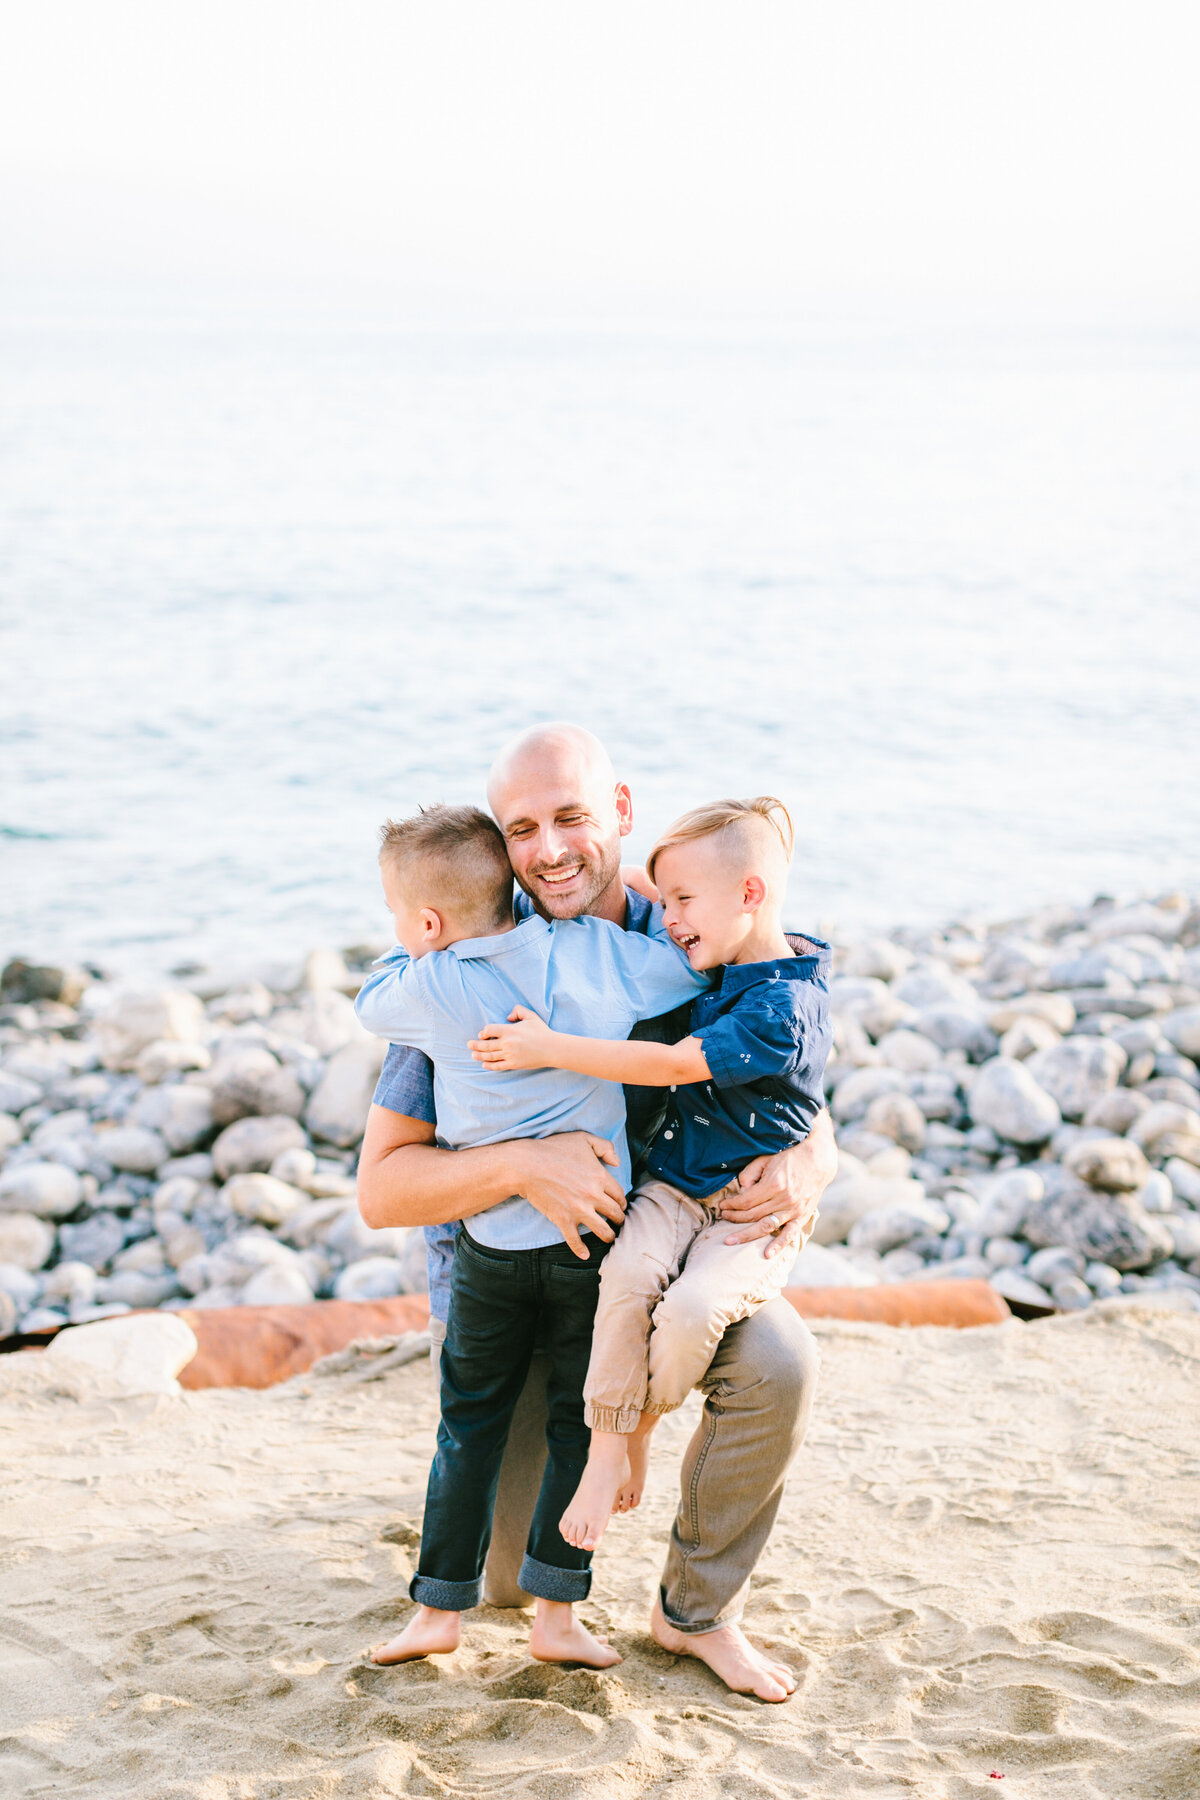 Best California and Texas Family Photographer-Jodee Debes Photography-71